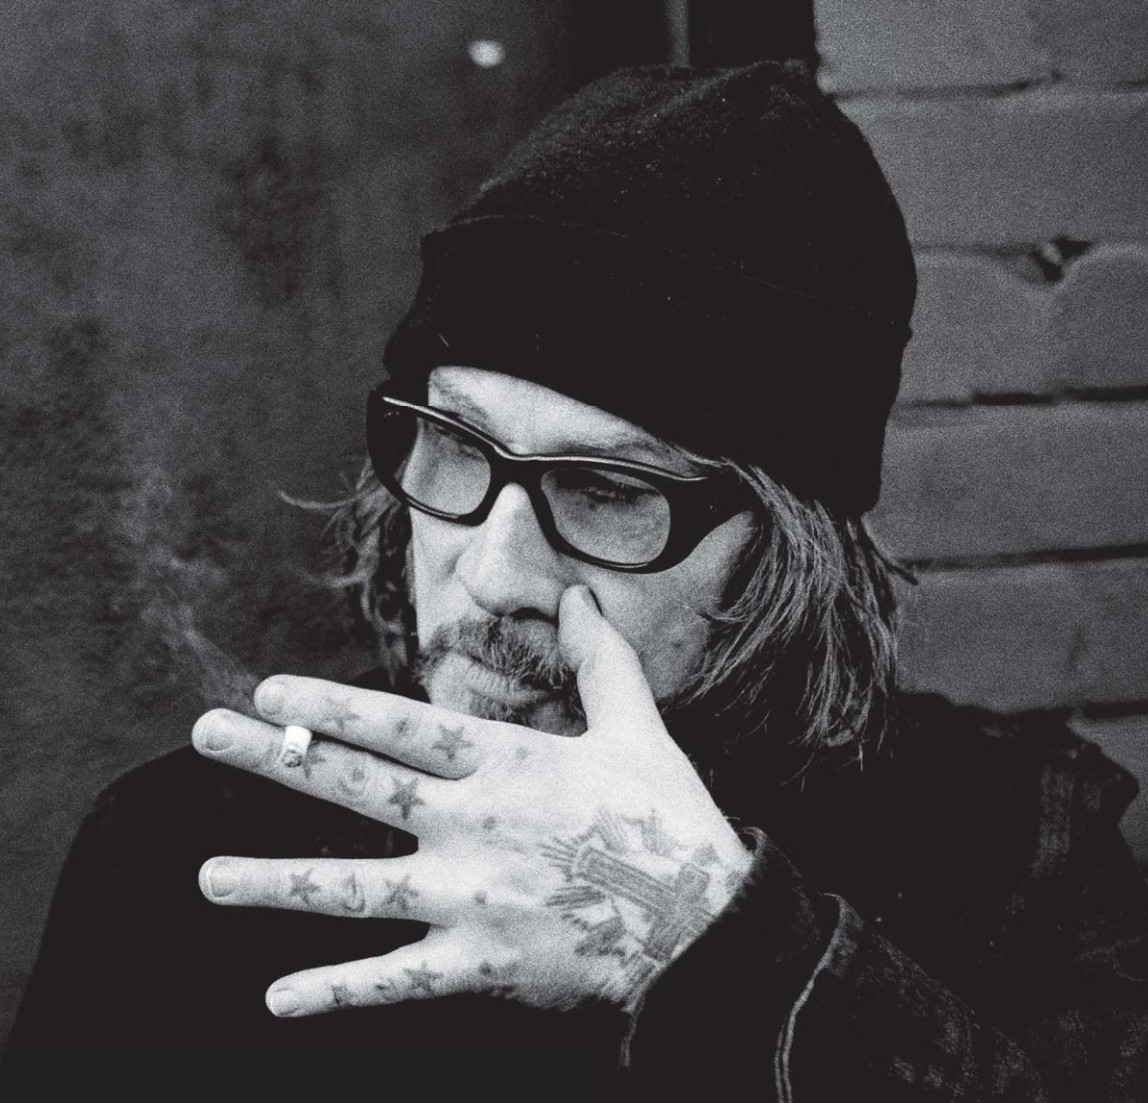 The Mark Lanegan Pictures Thread  the onewhiskeycom forum